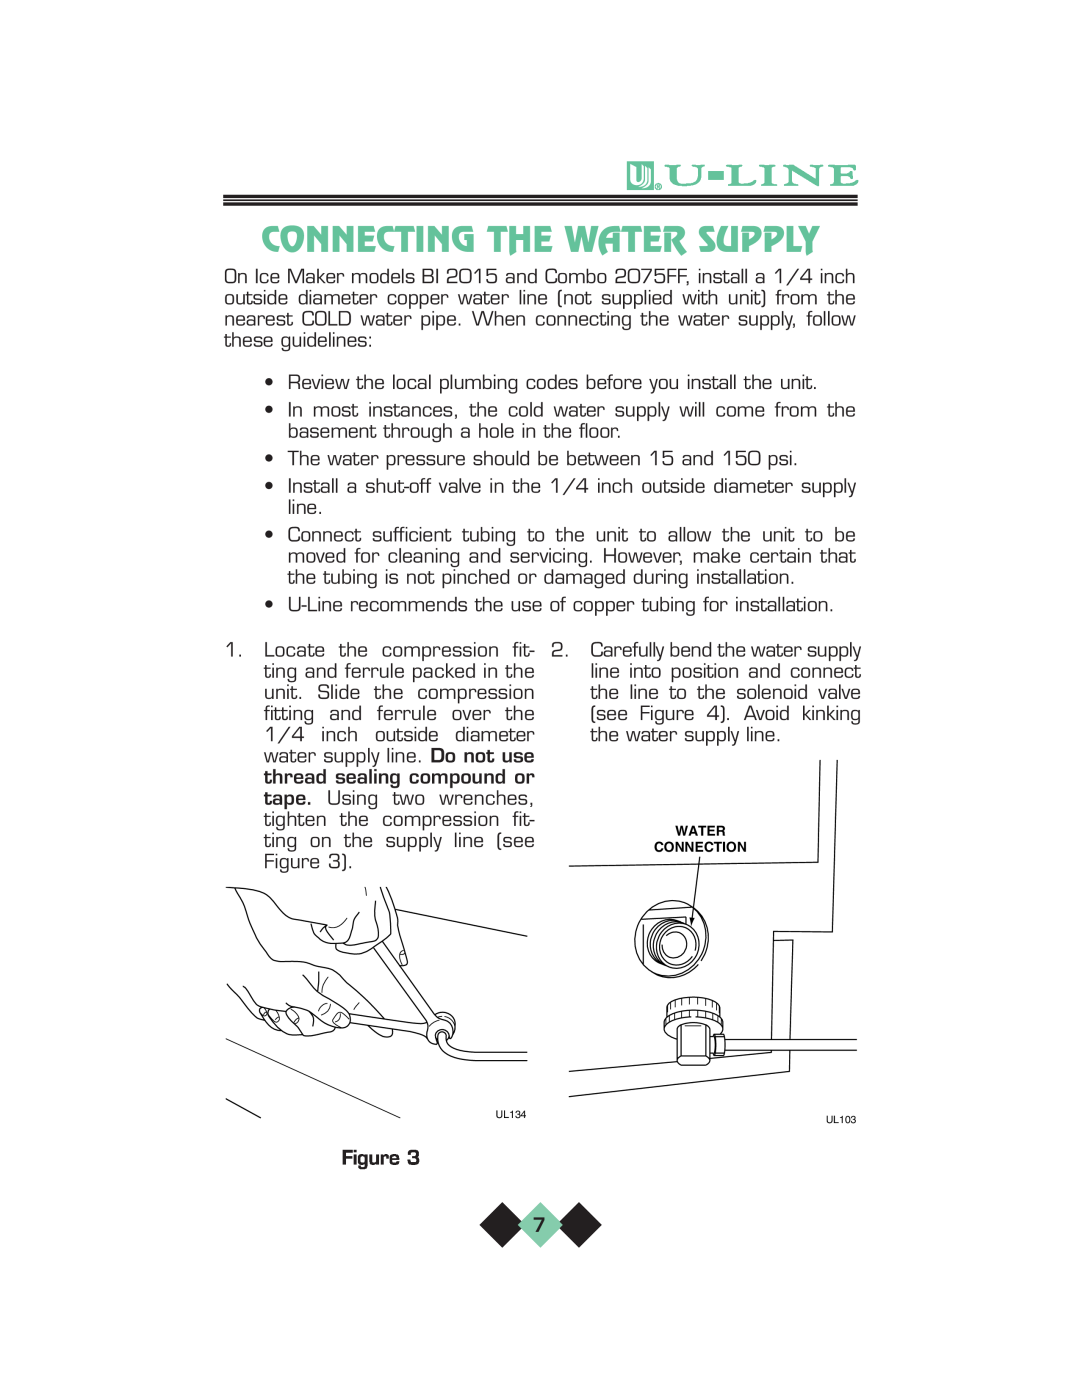 U-Line pmn manual Connecting The Water Supply, Connection 